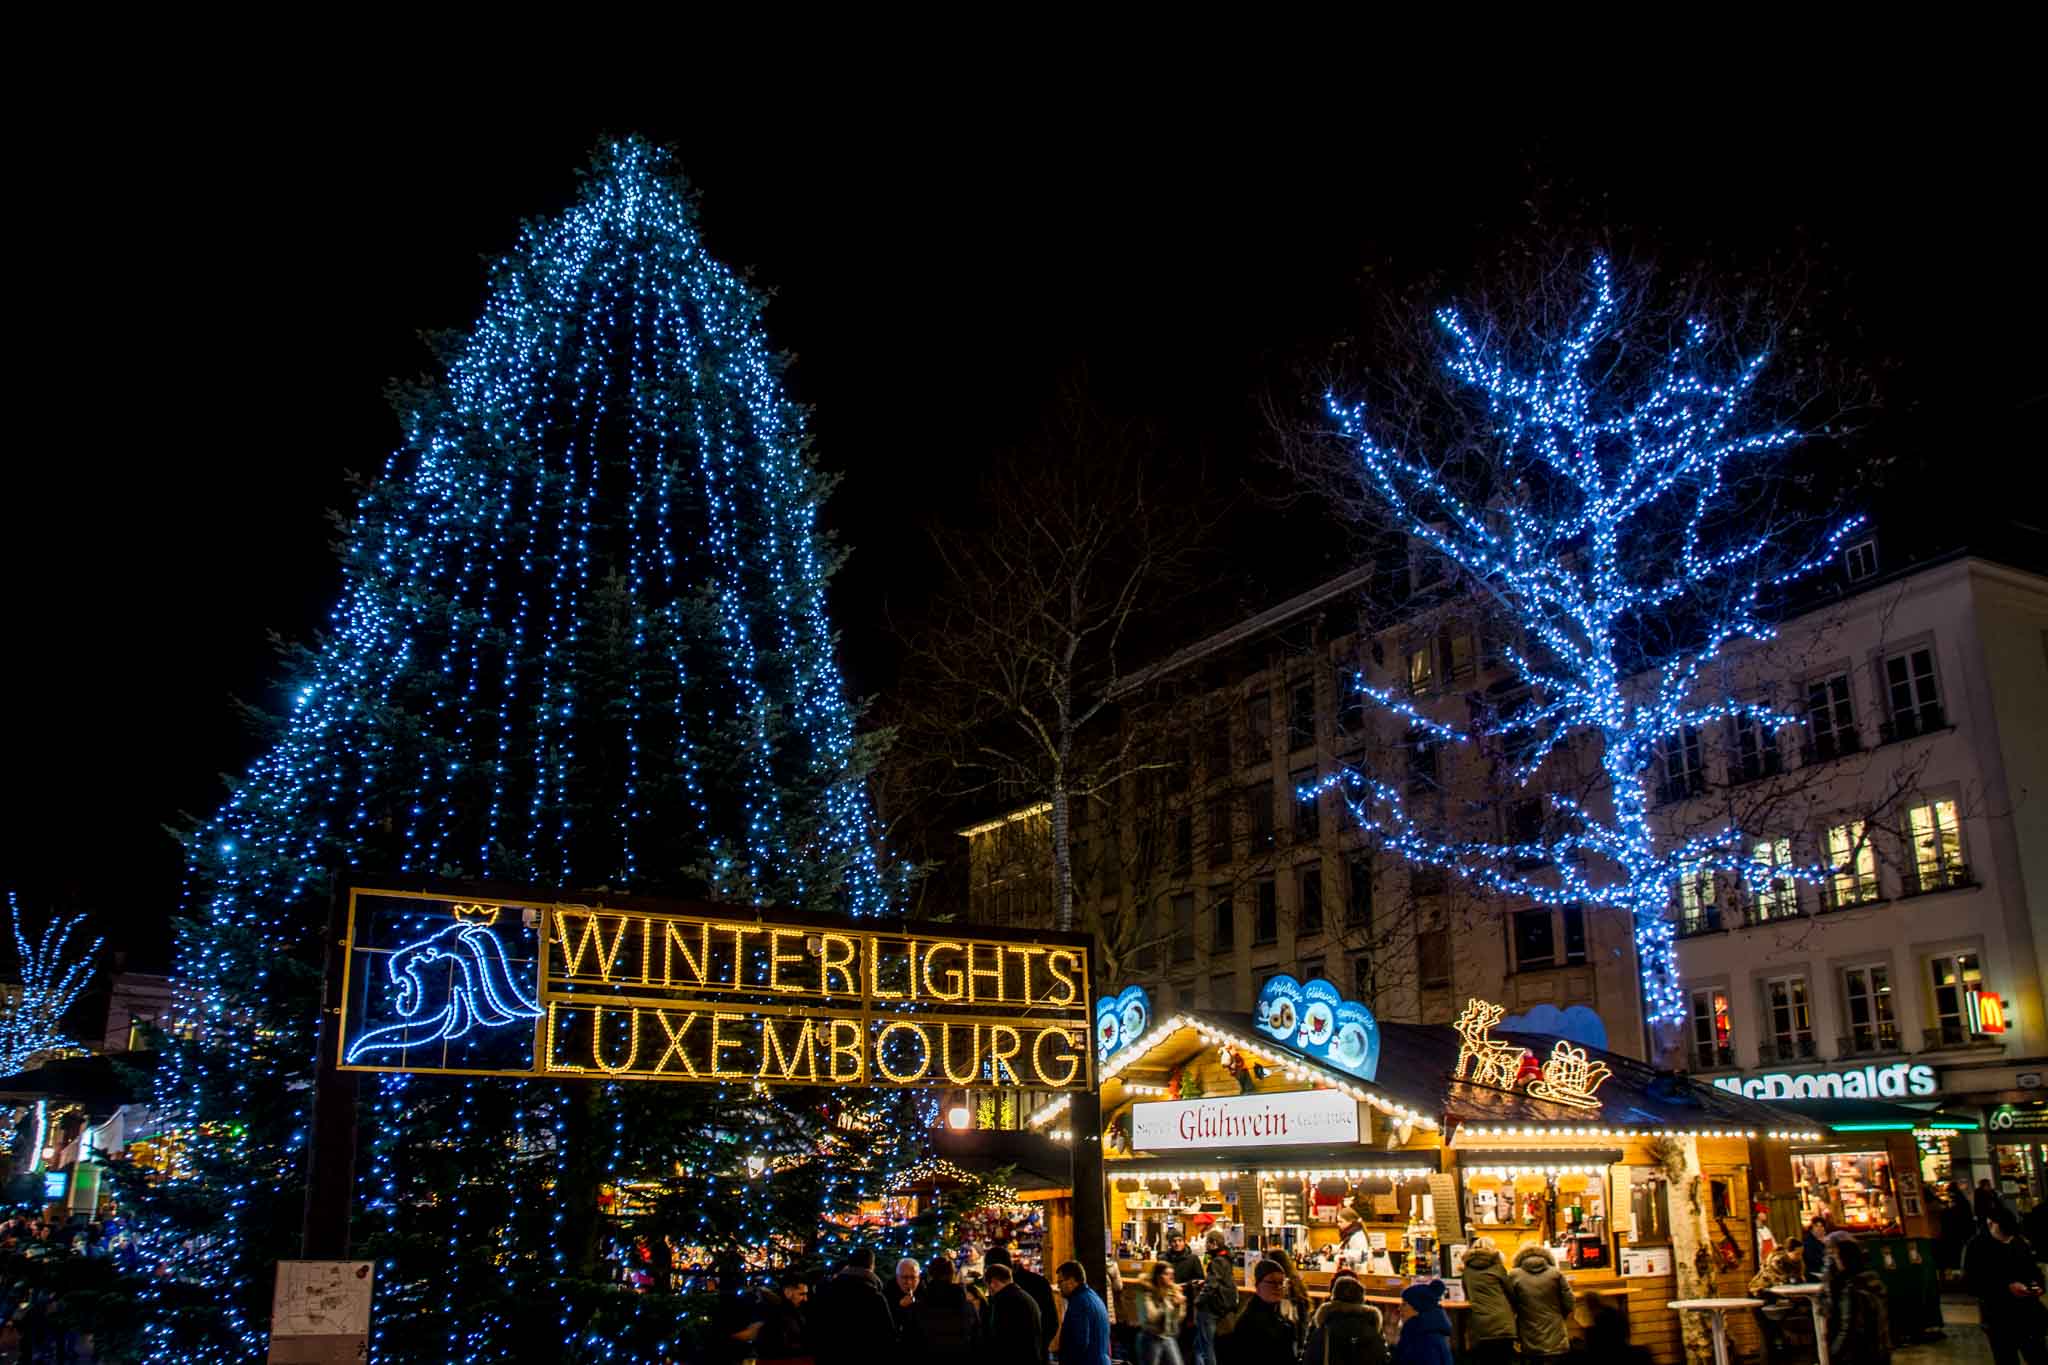 The Luxembourg Christmas markets are decked out with lights for the holiday season